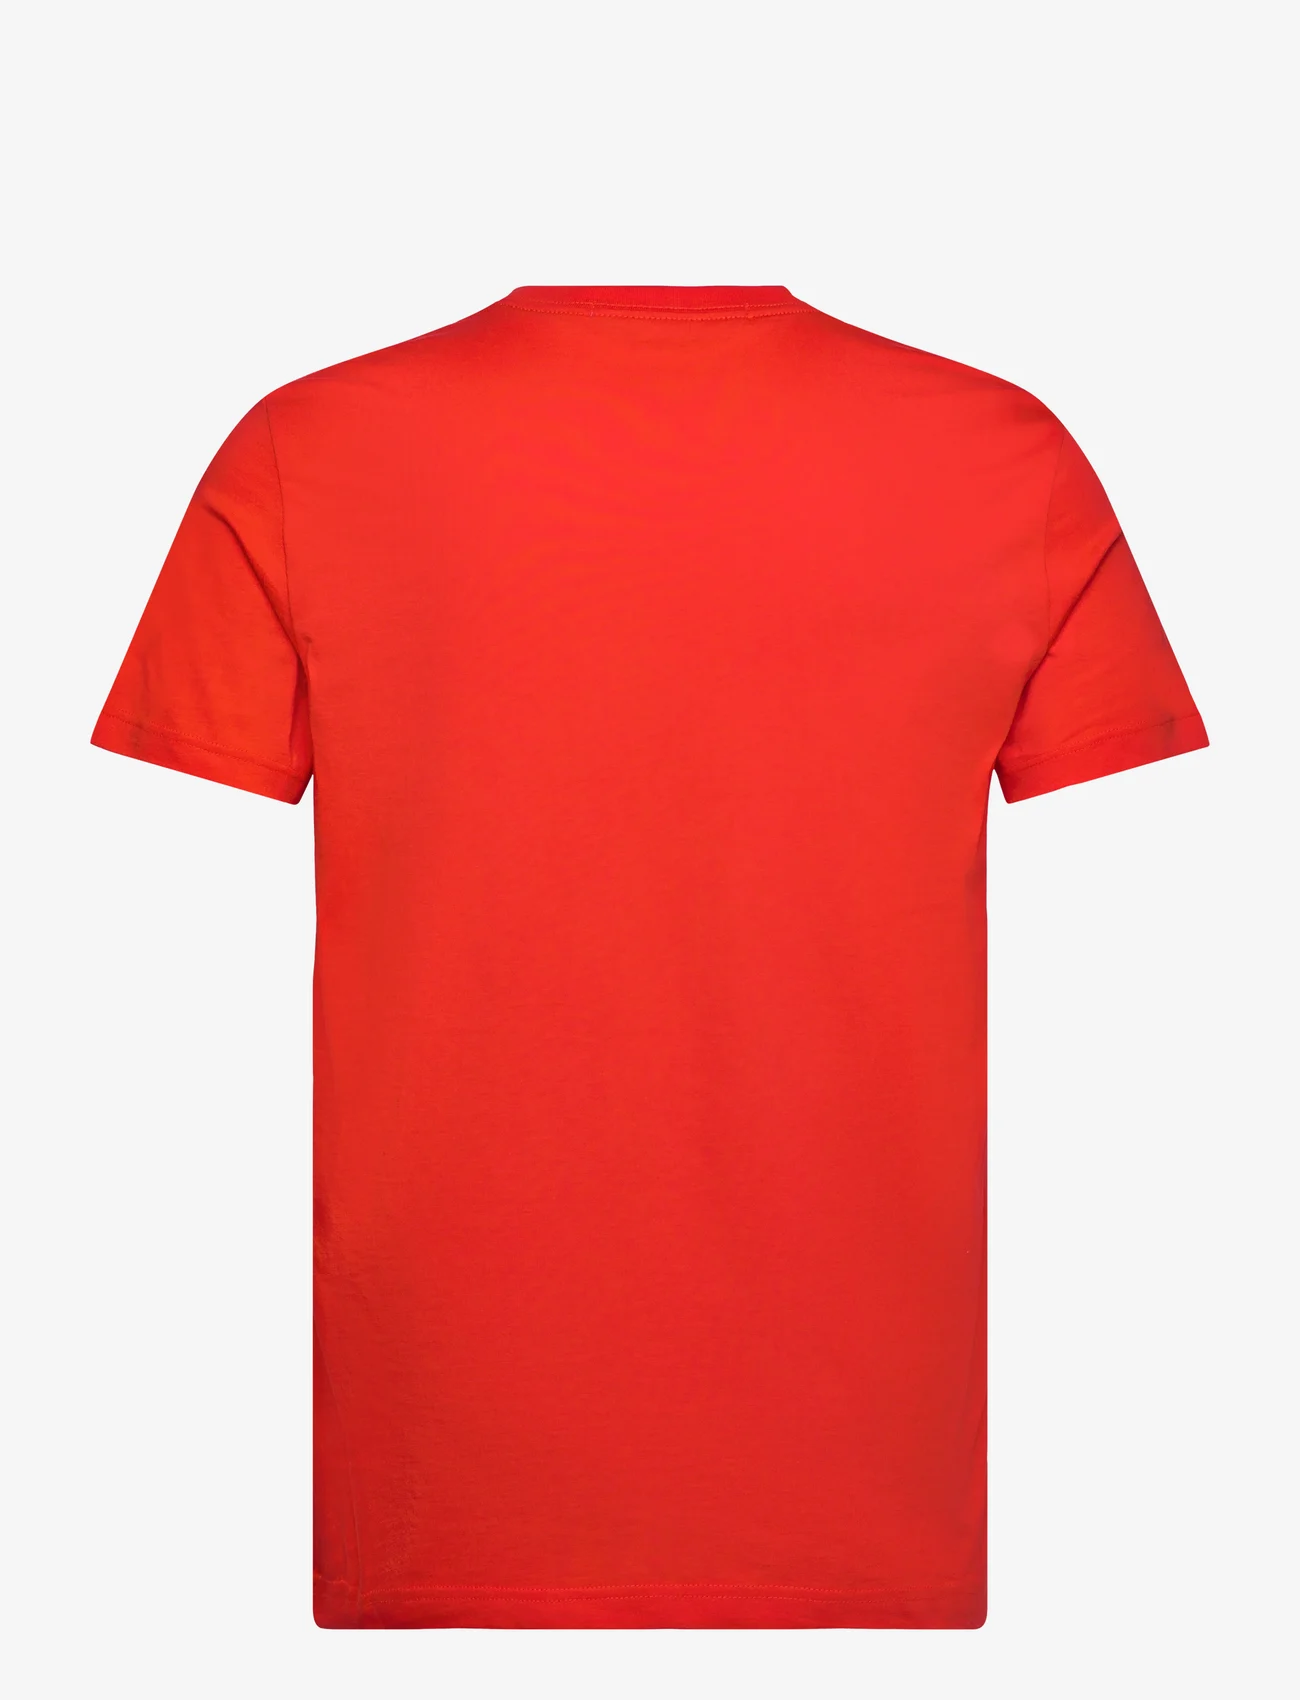 Calvin Klein Jeans - MONOLOGO REGULAR TEE - lowest prices - fiery red - 1